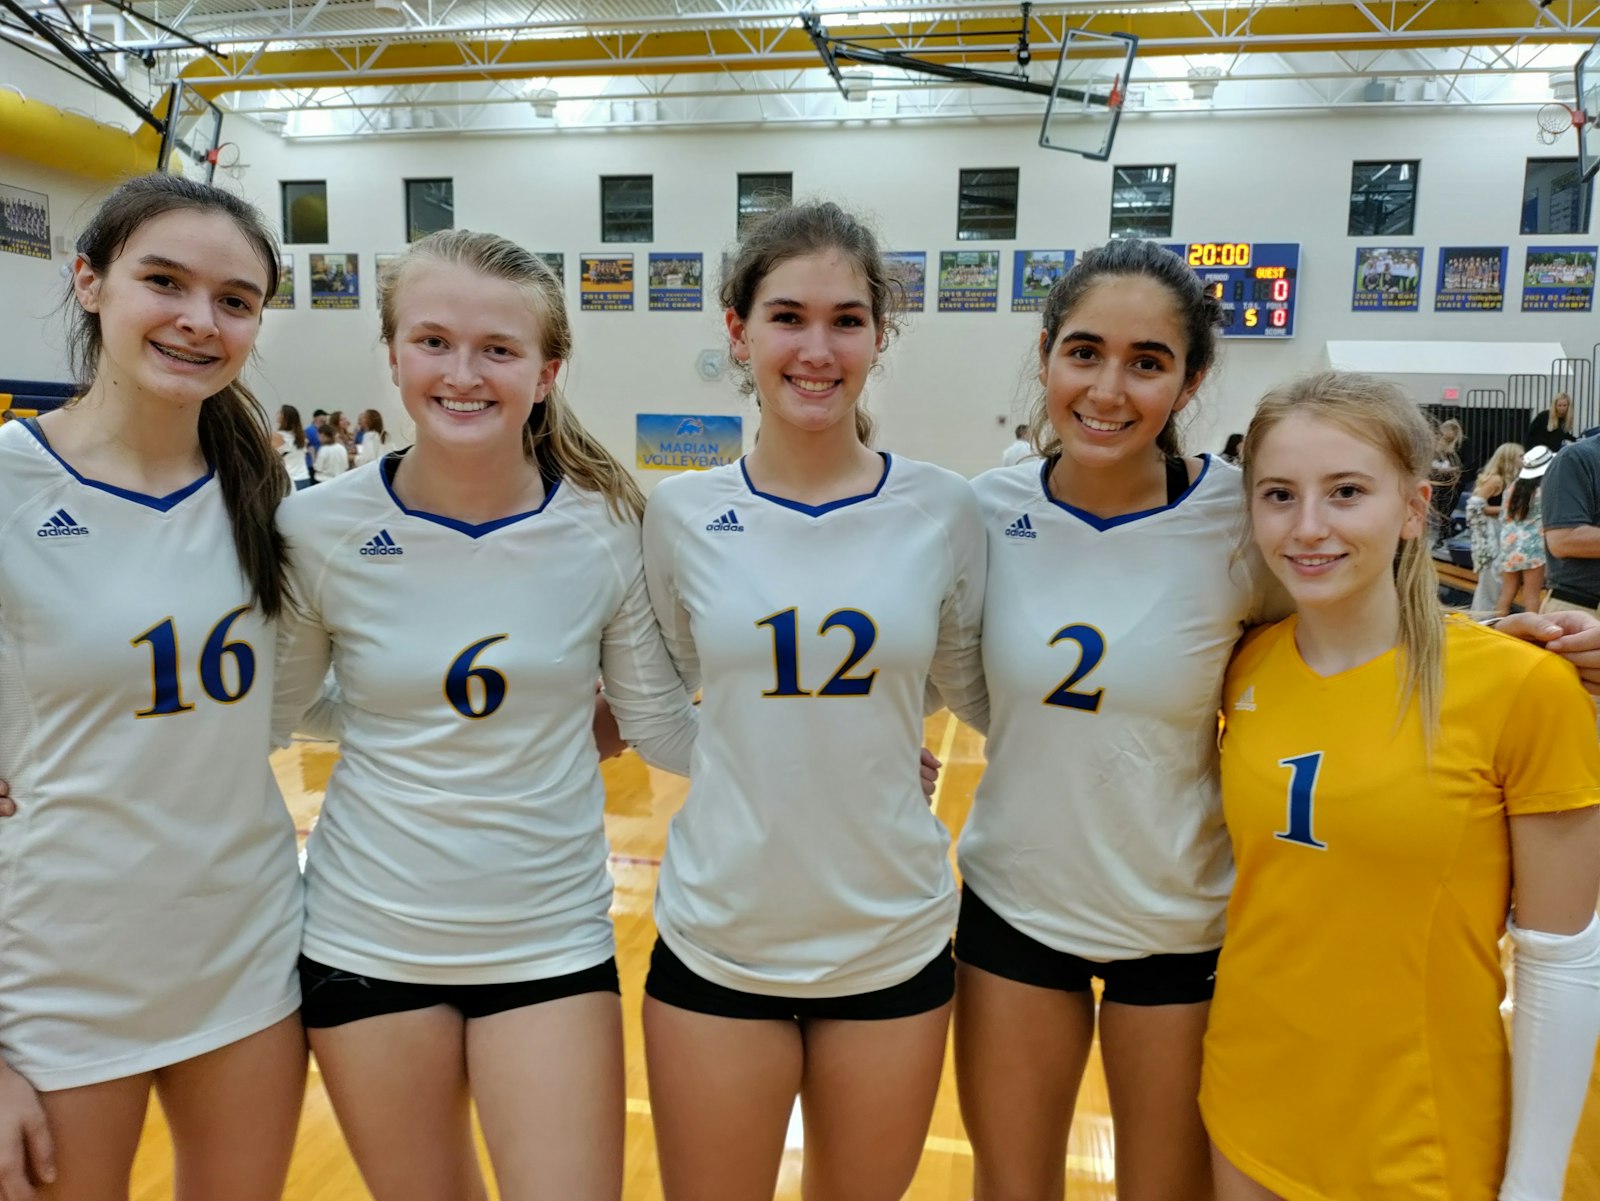 With the departure of four key players for Marian’s success last year, these five have stepped up in the early-season schedule to get the Mustangs off to a winning start: sophomore Izzy Busignani (left), senior Molly Banta, senior Ella Schomer, senior Ava Sarafa and senior Lauren Heming. (Don Horkey | Special to Detroit Catholic)